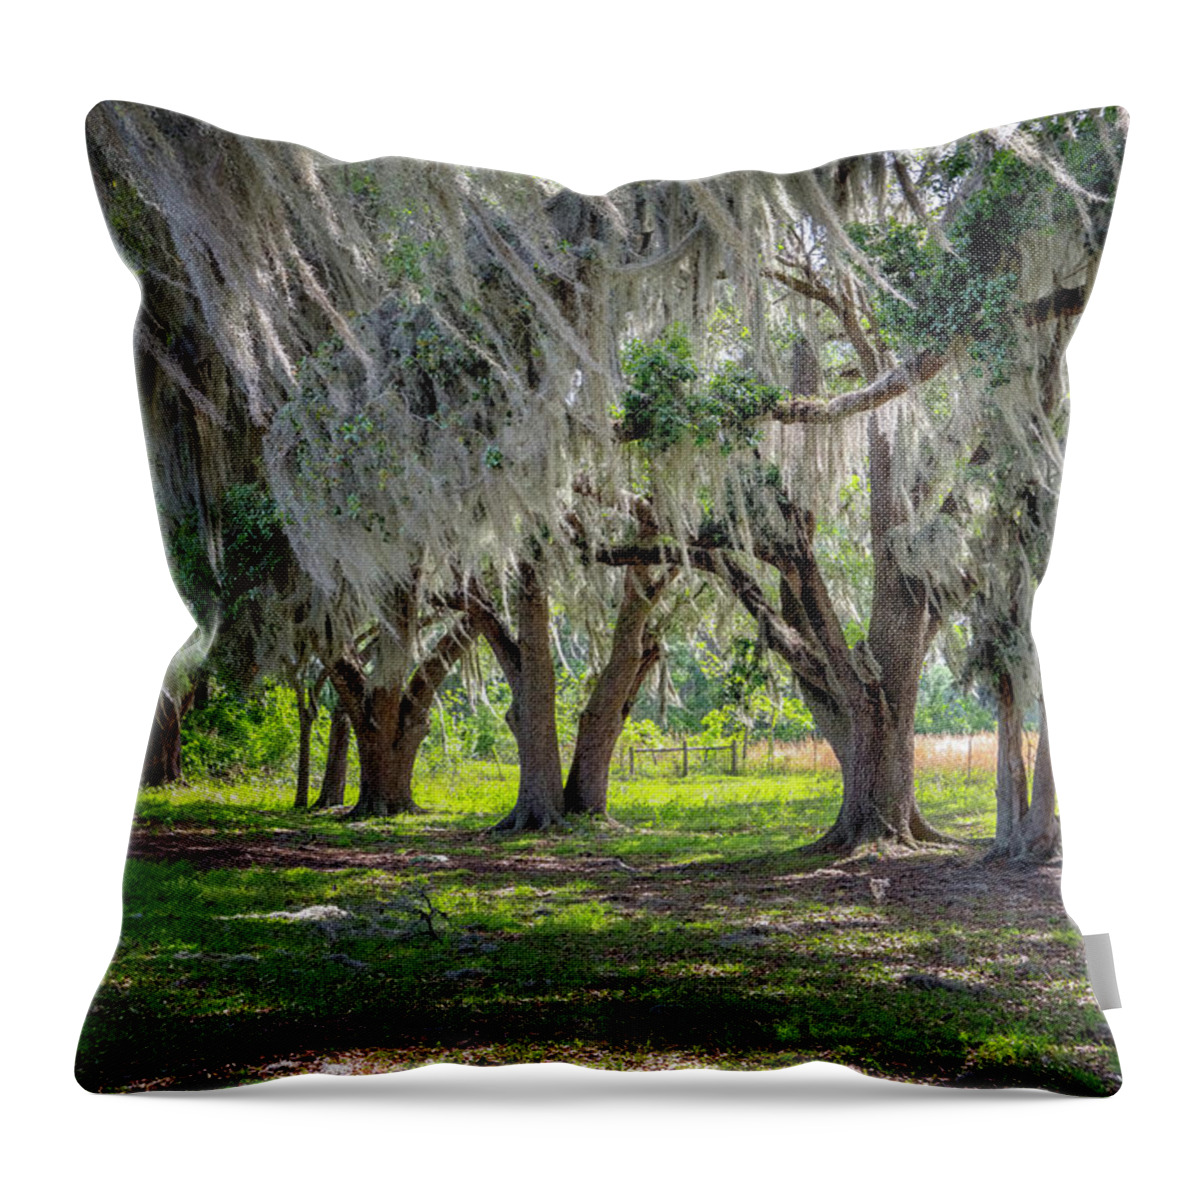 North Port Florida Throw Pillow featuring the photograph Spanish Moss by Tom Singleton